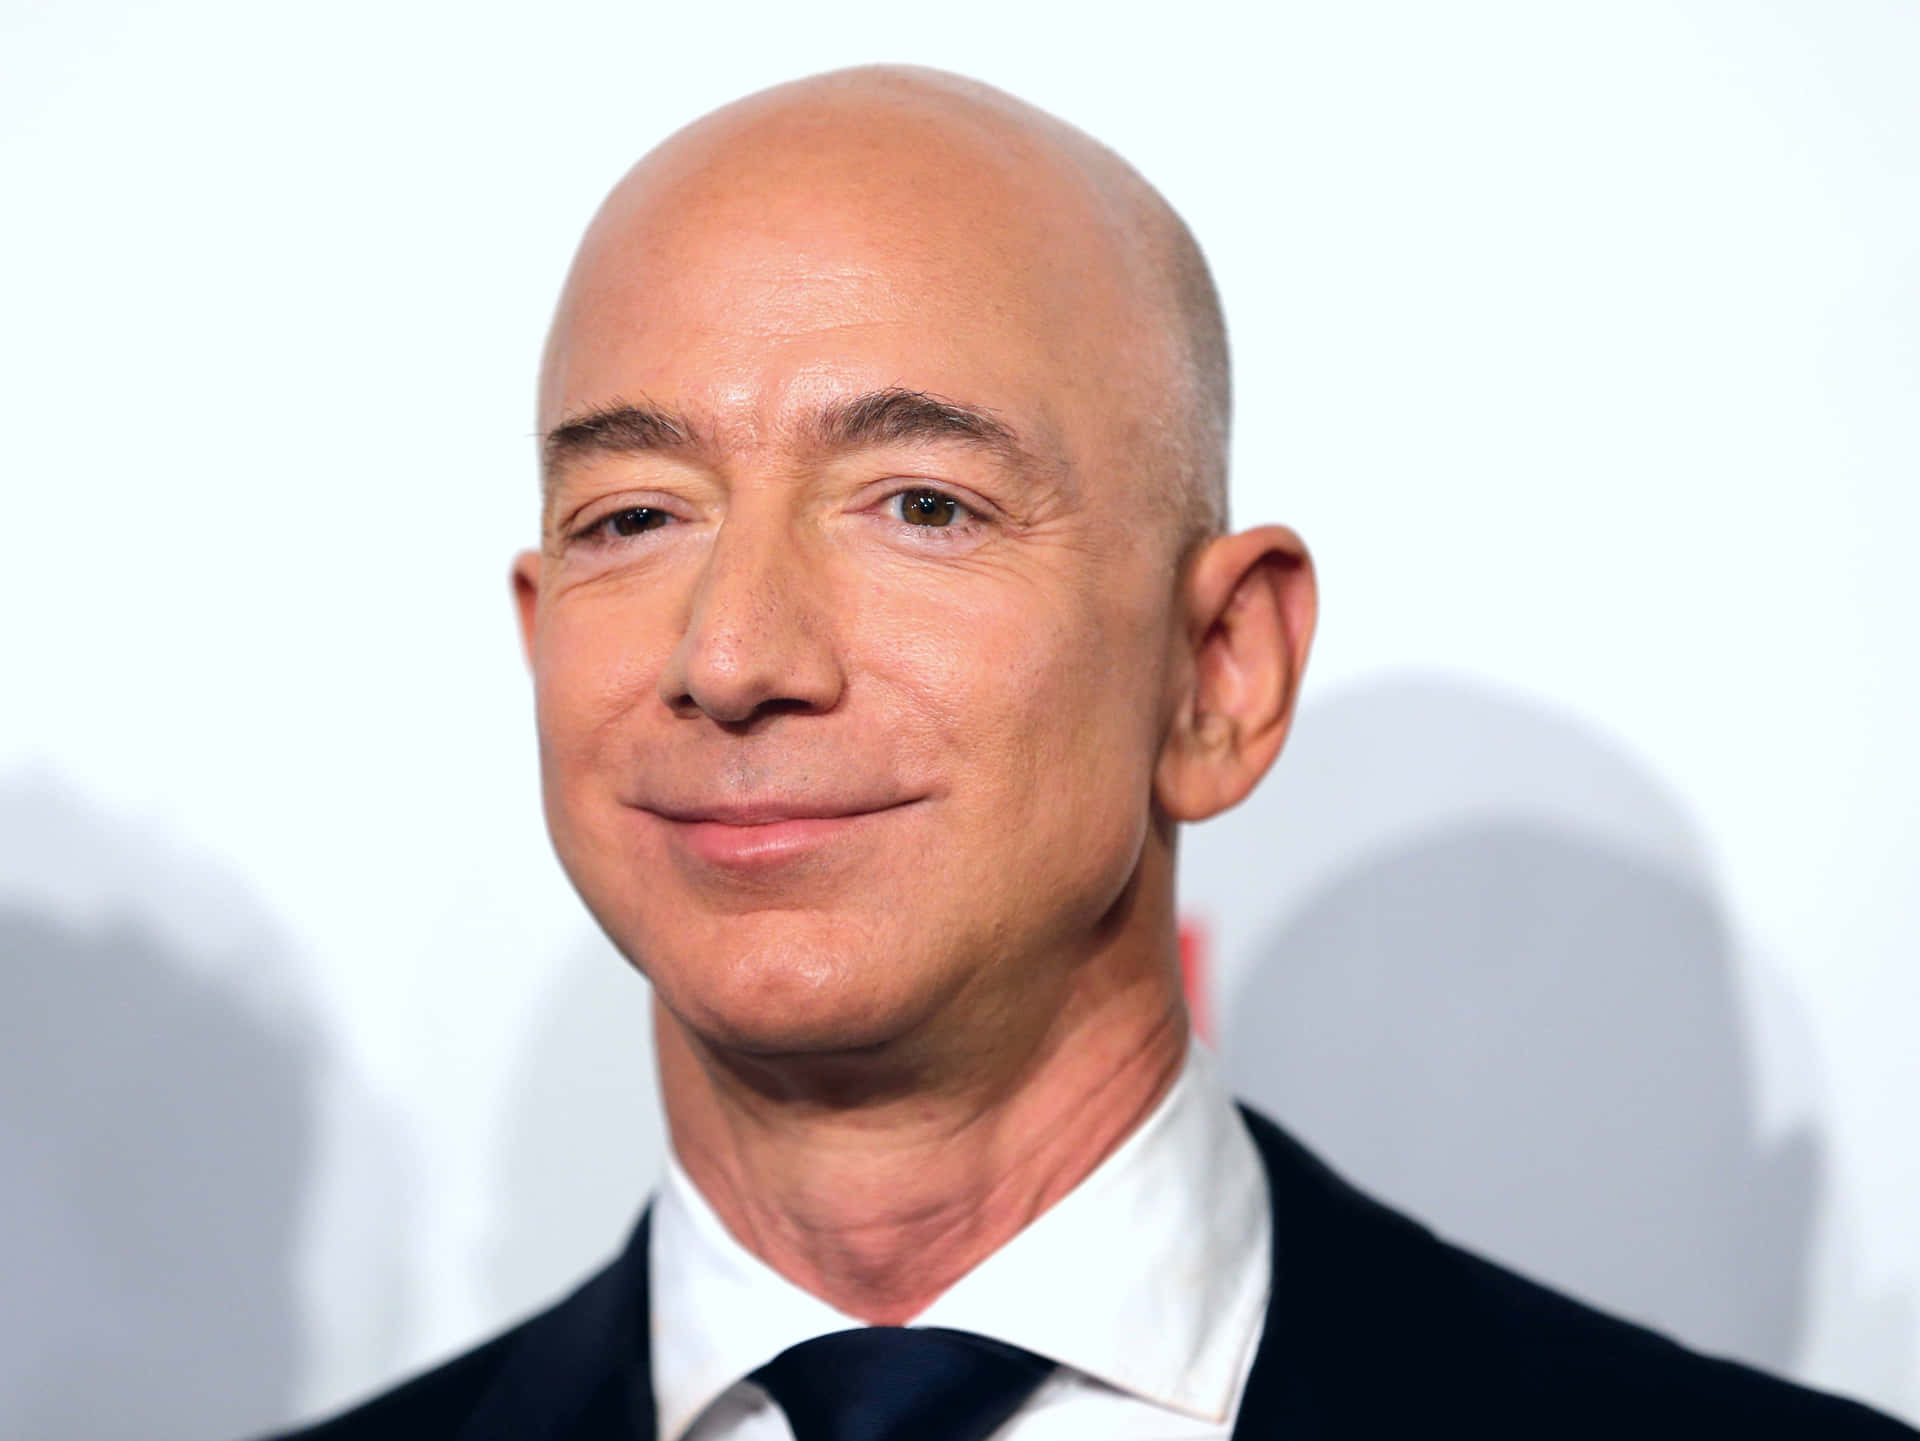 Jeff Bezos Smiling During a Business Event